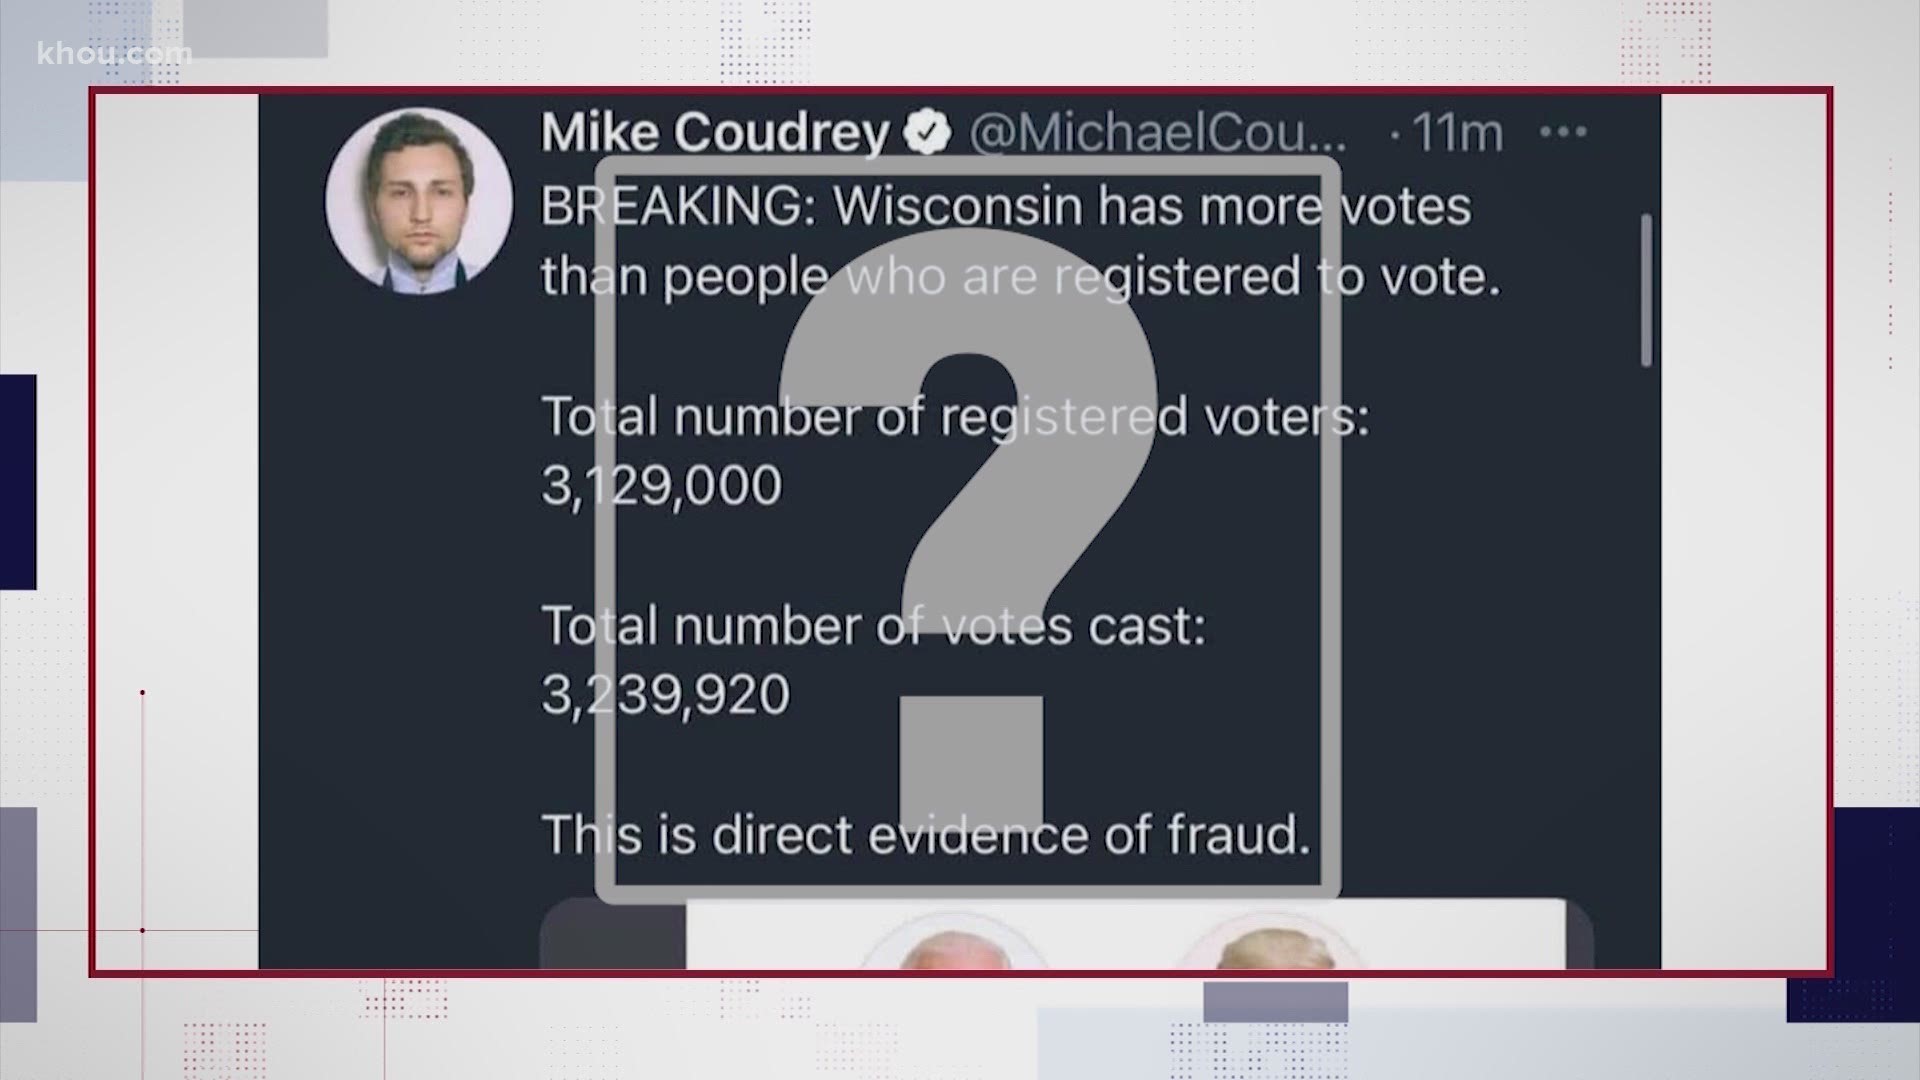 There were several hundred thousand additional registered voters than votes in Wisconsin.